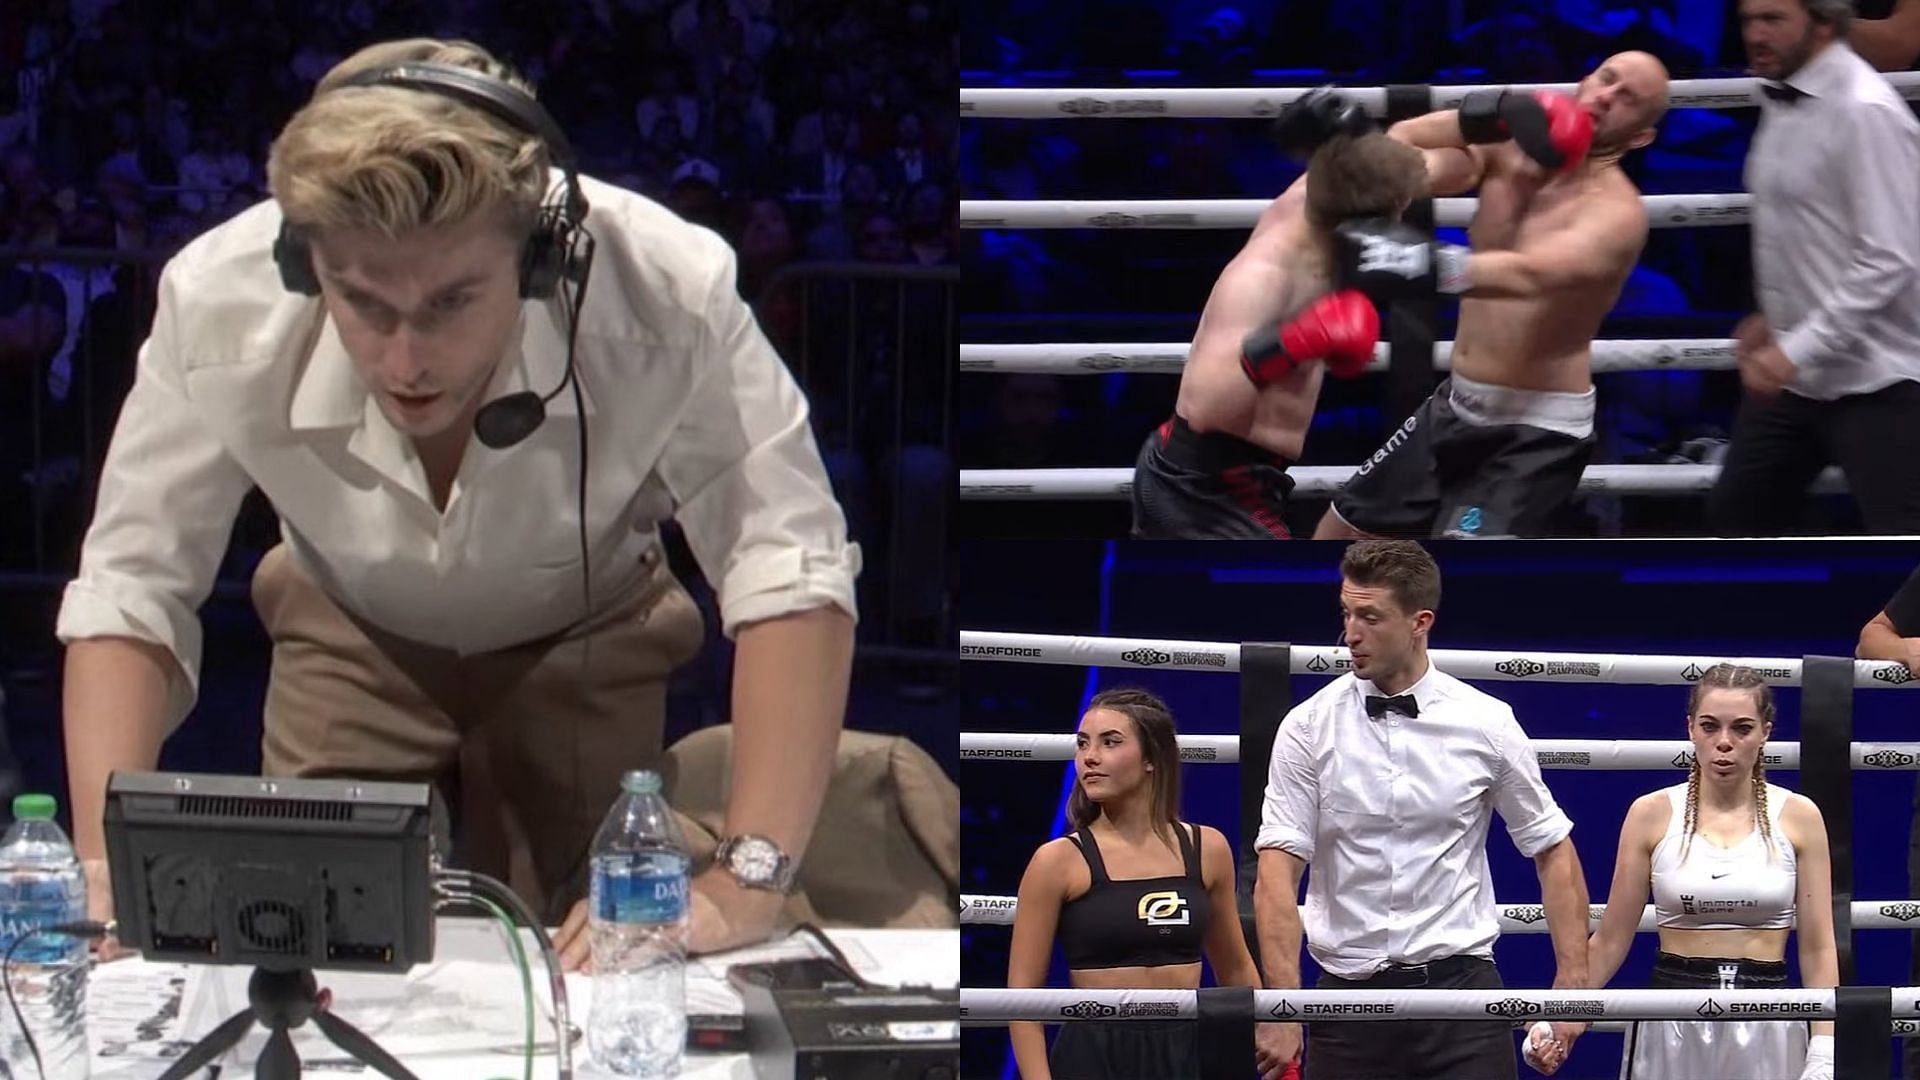 Andrea Botez Awarded TKO In Chessboxing, Two Winners 